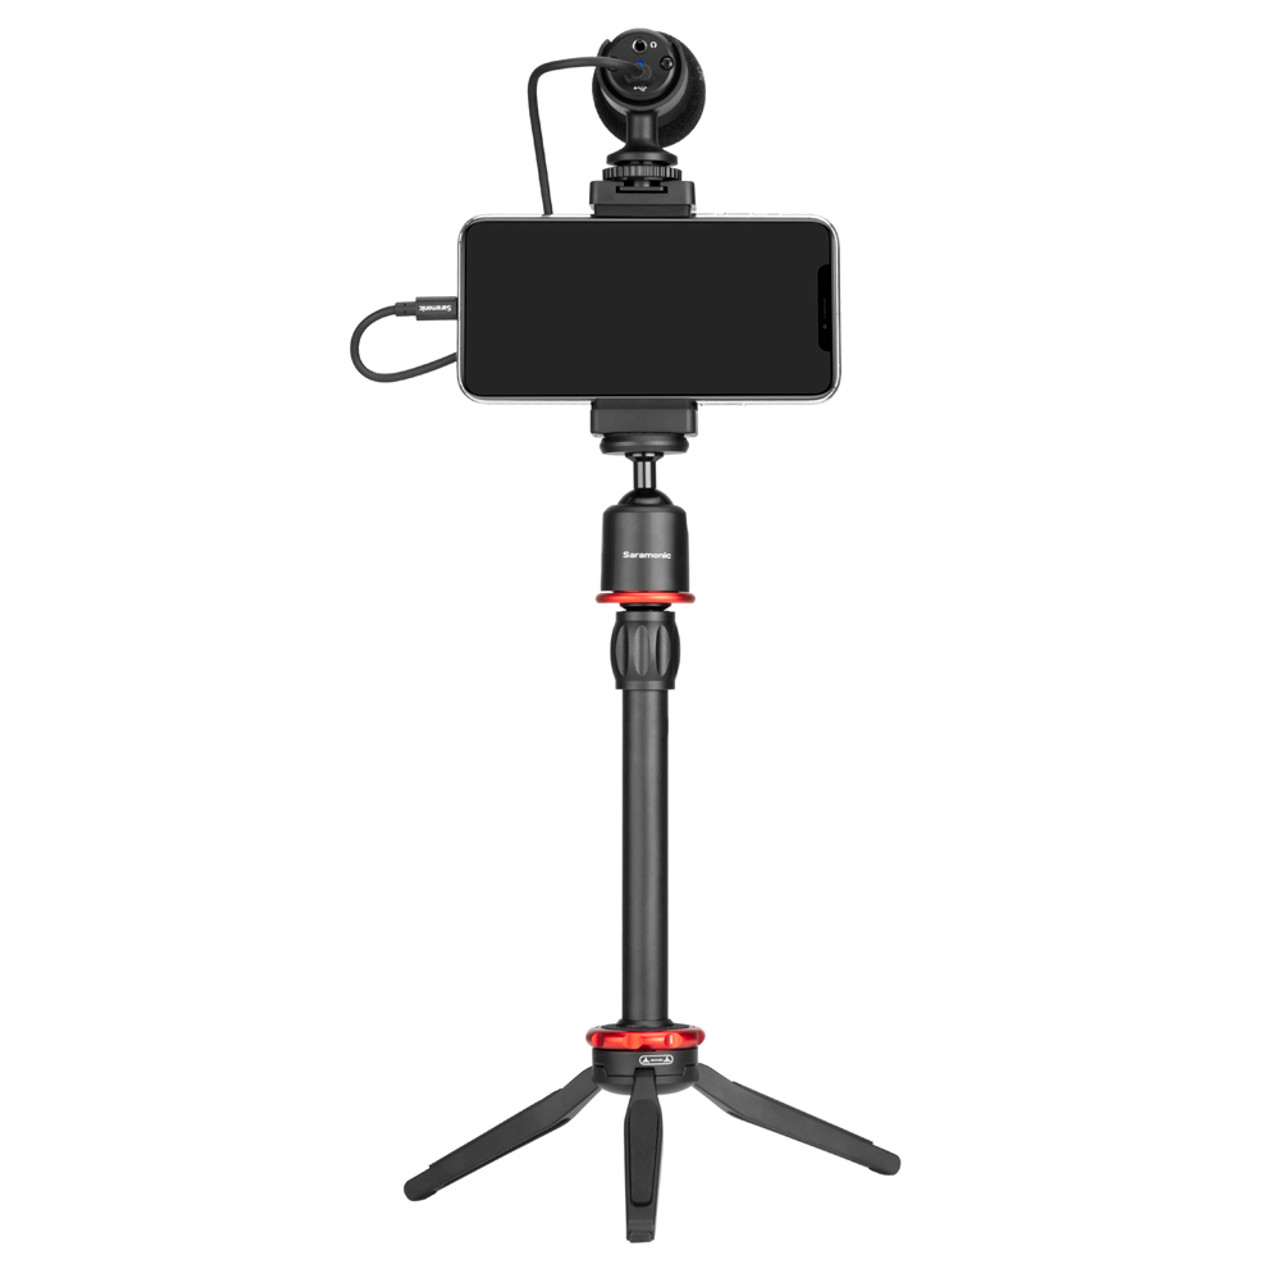 Saramonic SmartMic MTV Smartphone Video and Vlogging Kit for iPhone &  Android with Stereo Microphone, Phone Mount, Tripod, Headphone, Lightning & 